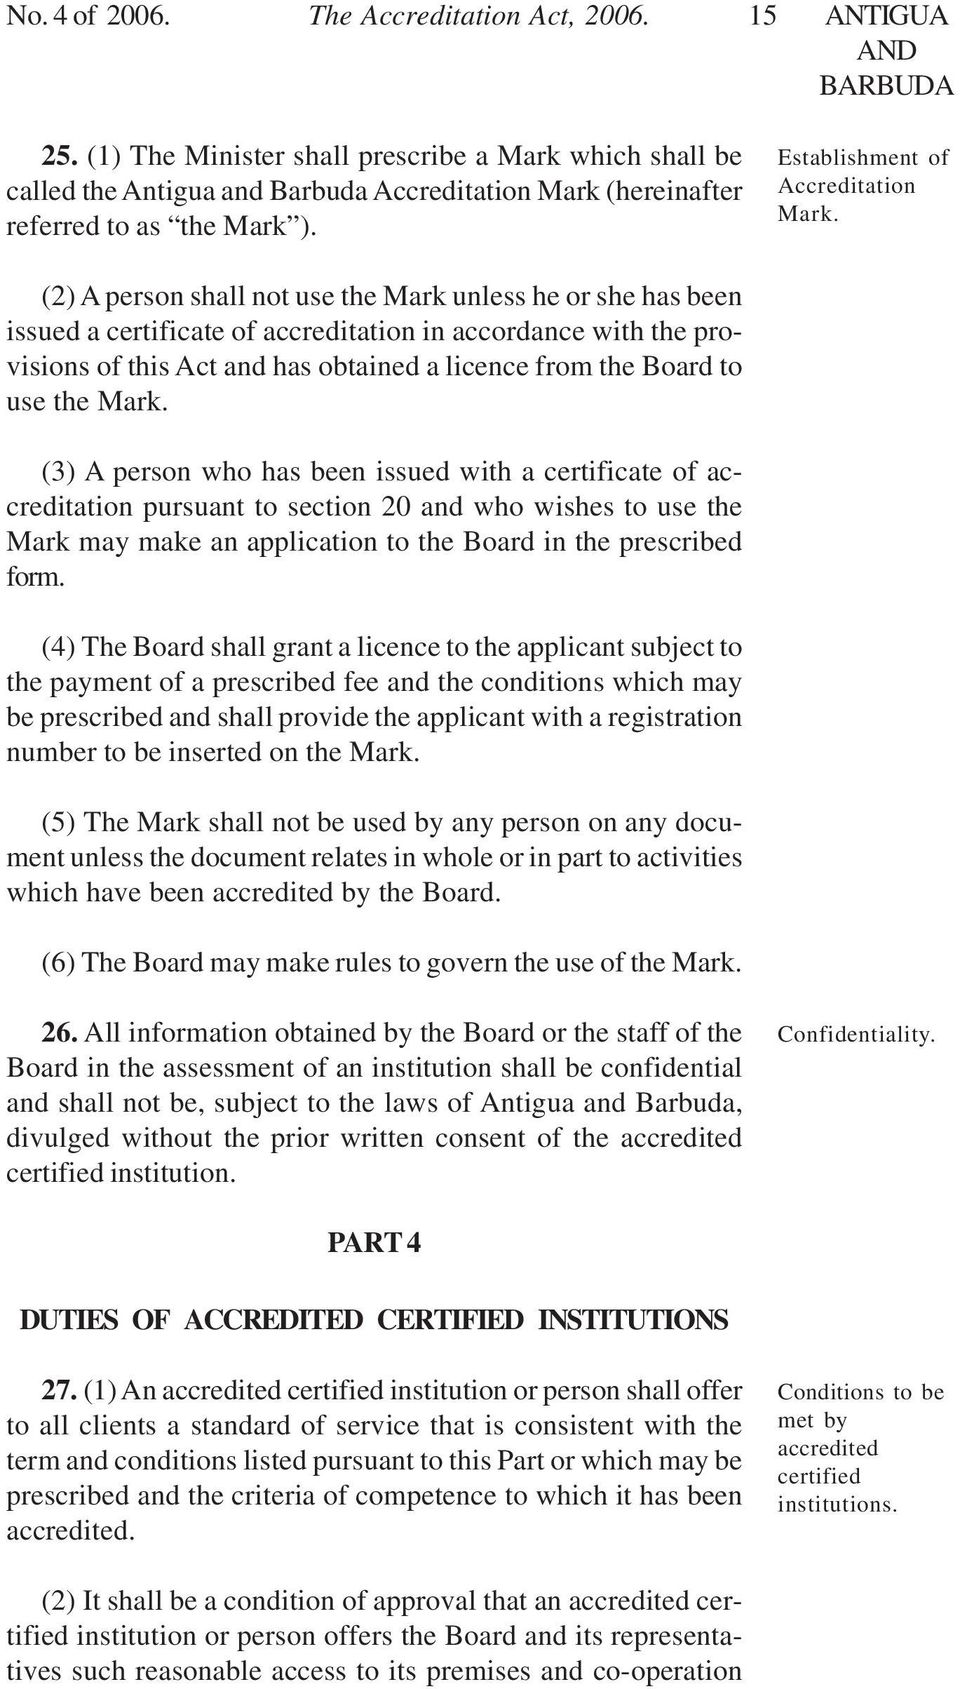 (2) A person shall not use the Mark unless he or she has been issued a certificate of accreditation in accordance with the provisions of this Act and has obtained a licence from the Board to use the